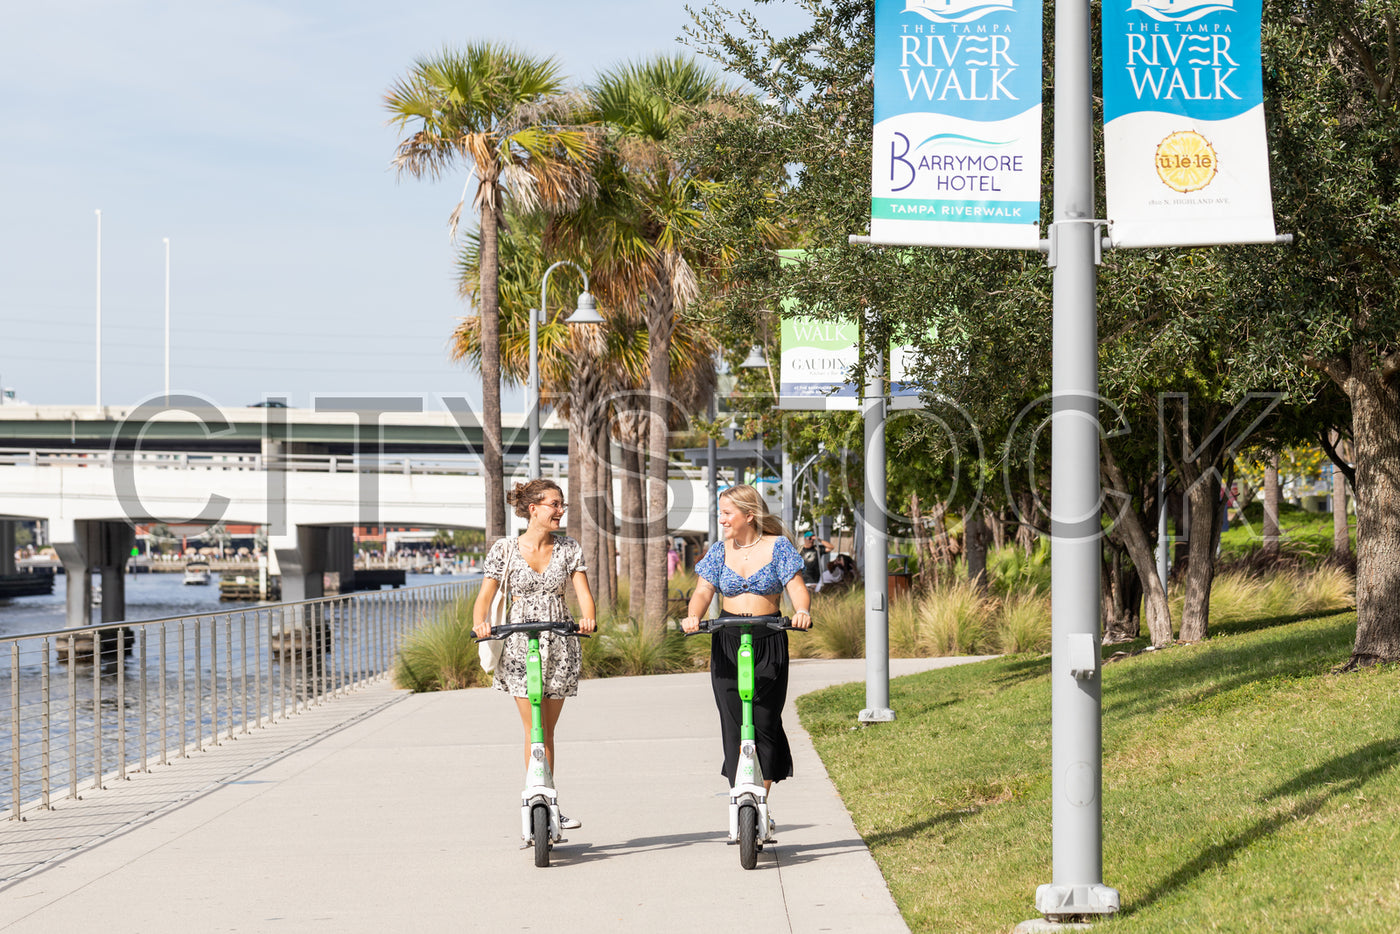 Young women enjoying a scooter ride on Tampa Riverwalk under sunny skies